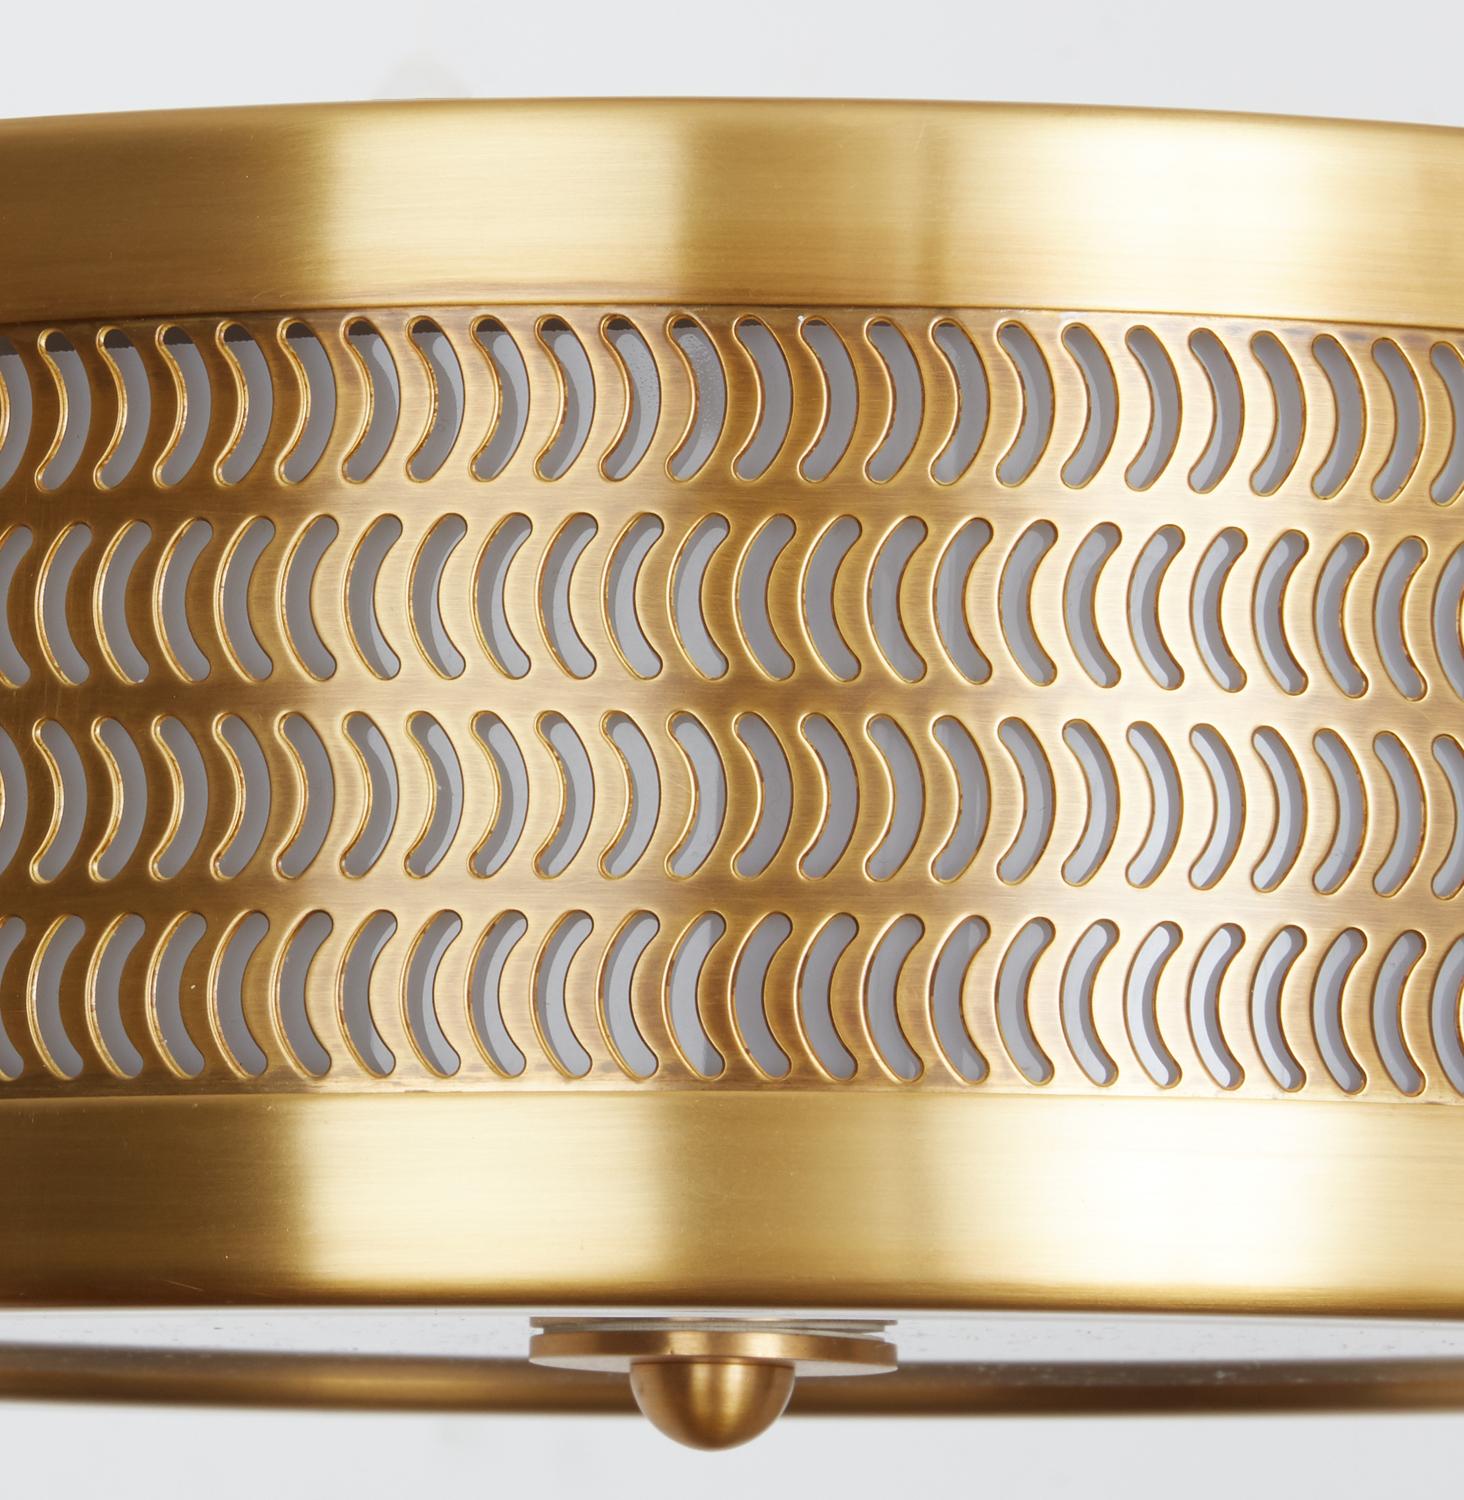 A new, contemporary David Duncan design. A brass flush mount with comma-shaped cutouts emitting light through an opal plexi diffuser on the sides. The frame divided into three sections, with over-scaled, oval cast brass rosettes. The underside with